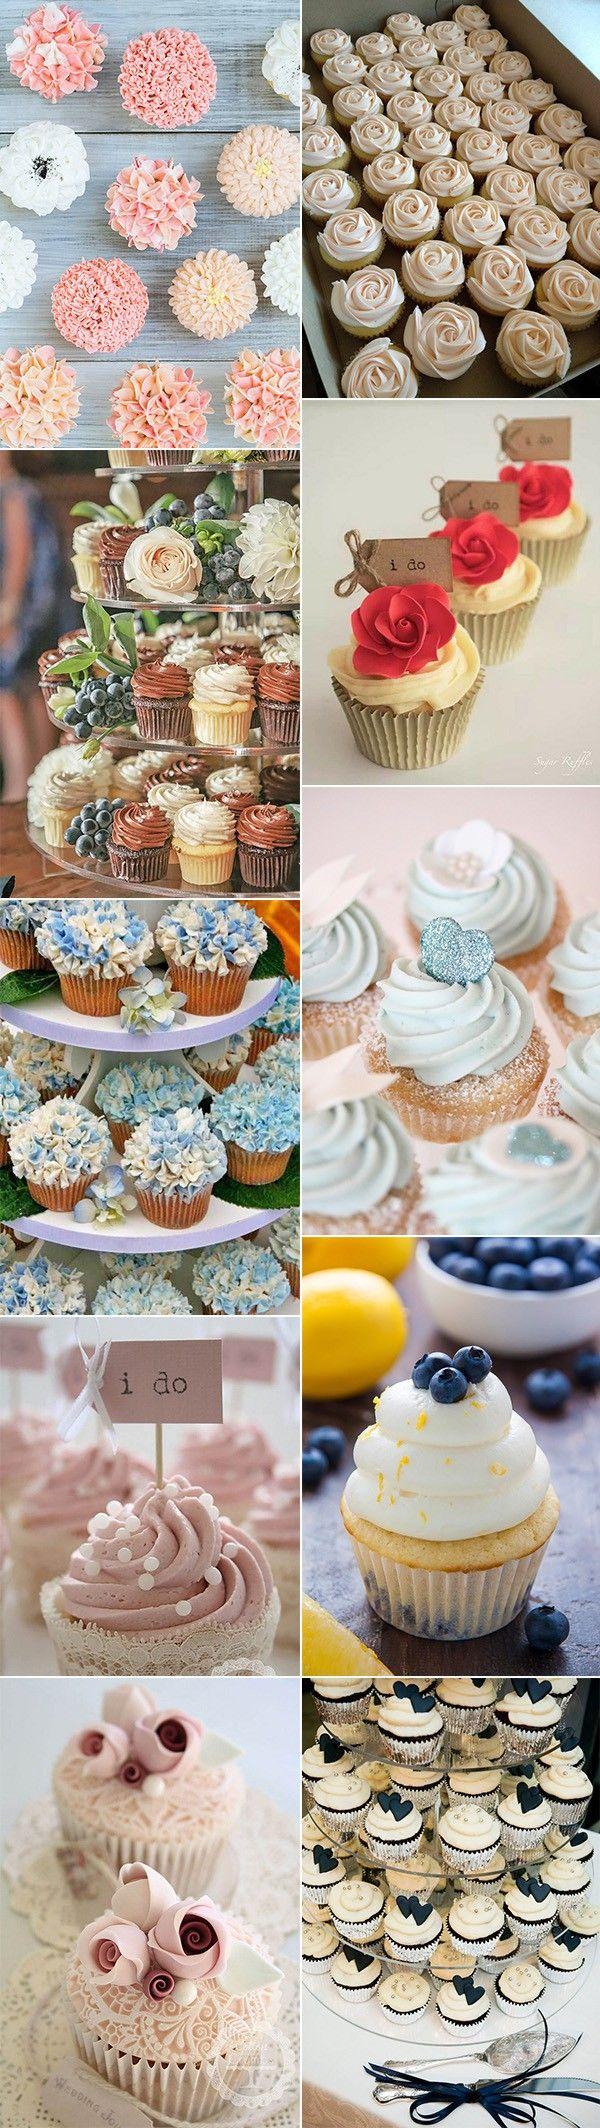 Wedding - 24 Creative Wedding Cupcake Ideas For Your Big Day - Page 3 Of 3